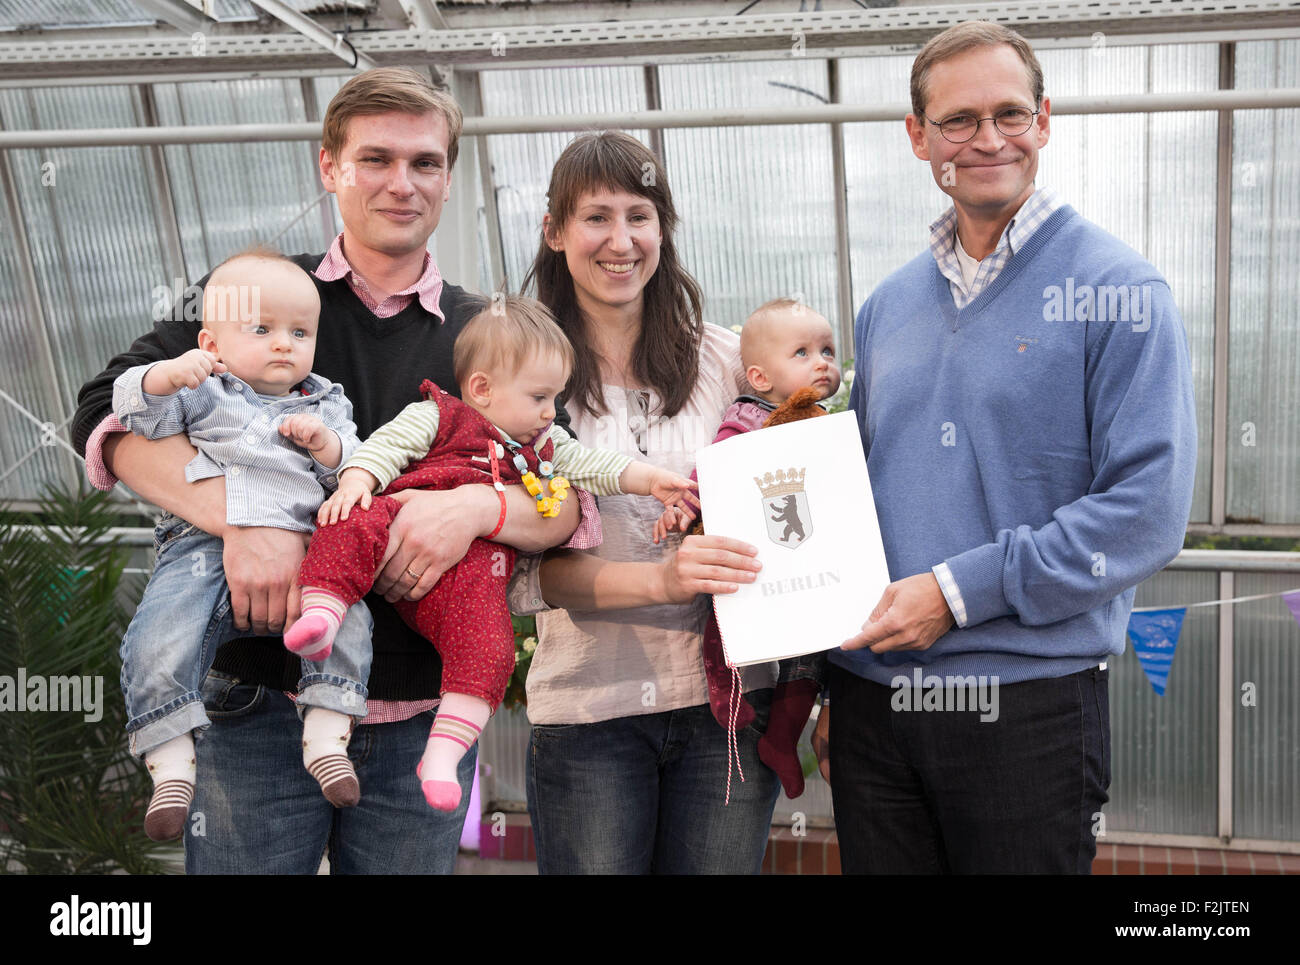 Berlin, Germany. 20th Sep, 2015. Berlin's Governing Mayor Michael Mueller (R) hands a sponsorship certificate to the Ulonska family including the parents Johannes und Marlen and the triplets Karoline Sophie, Emilie Jara and Niklas Elias, in Berlin, Germany, 20 September 2015. Berlin's Governing Mayor has been acting as an honorary sponsor to children from multiple births with more than three babies if the parents agree to it. Photo: Joerg Carstensen/dpa/Alamy Live News Stock Photo